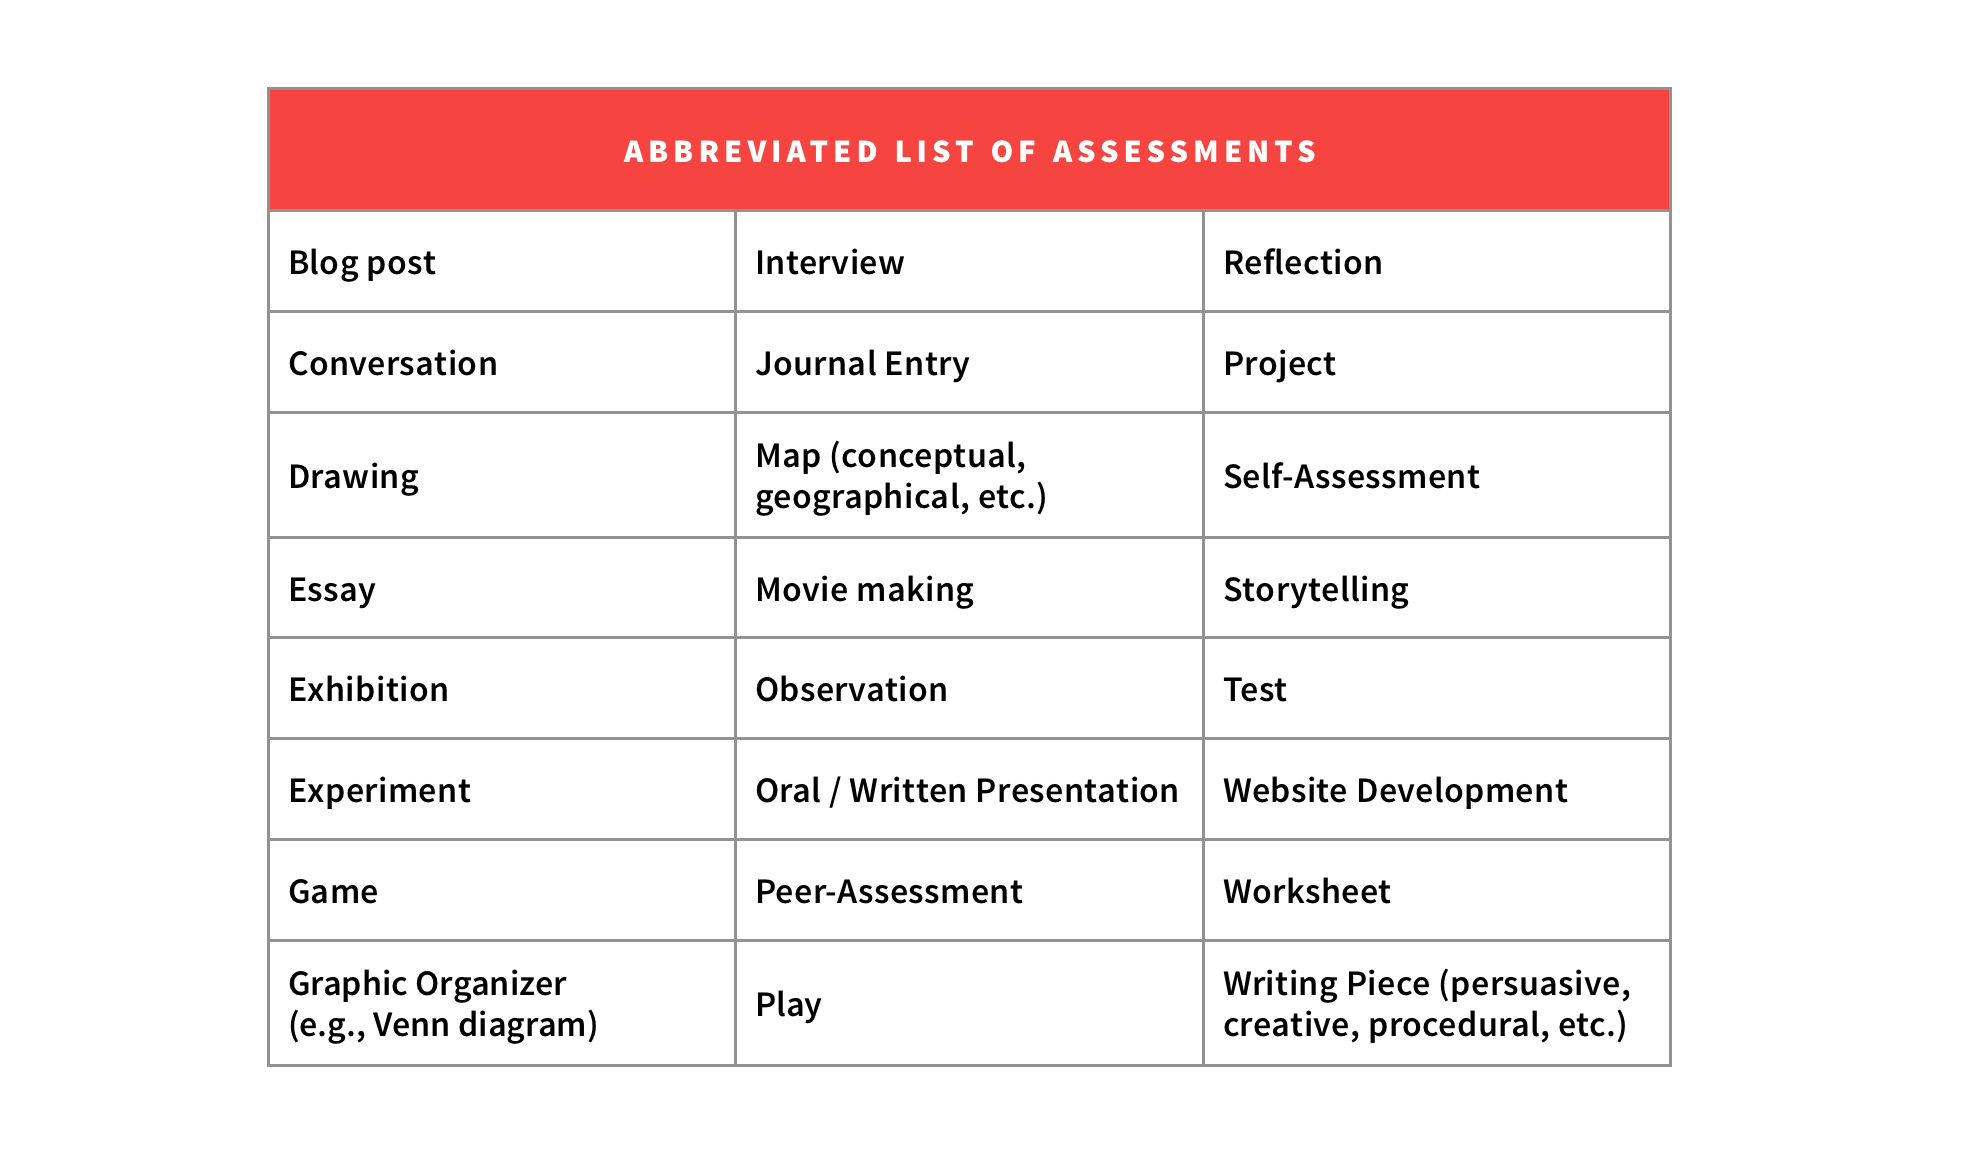 Table of Abbreviated List of Assessments